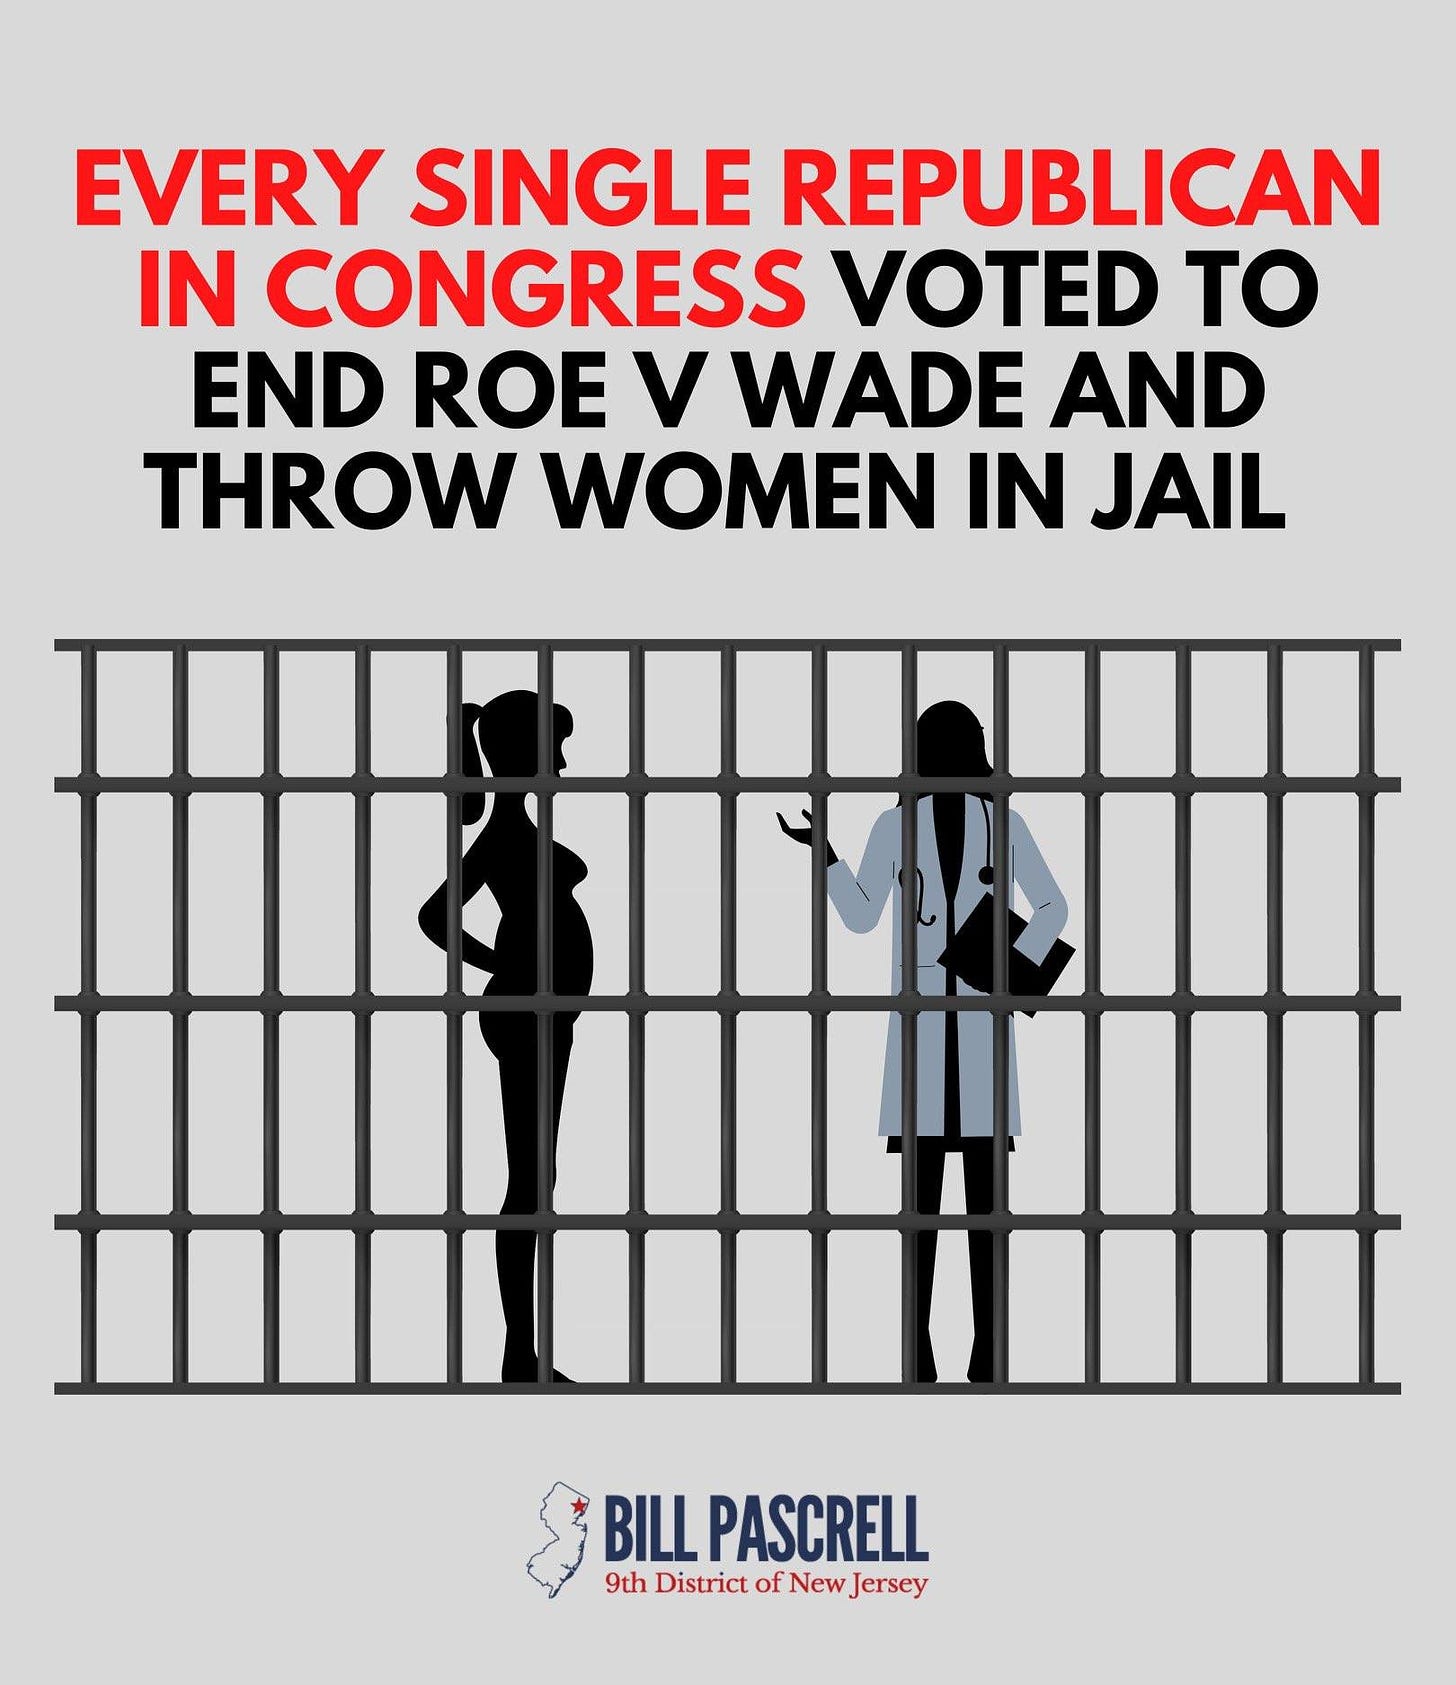 May be an image of 2 people and text that says 'EVERY SINGLE REPUBLICAN IN CONGRESS VOTED TO END ROE V WADE AND THROW WOMEN IN JAIL mmmii BILL PASCRELL 9th District of New Jersey'